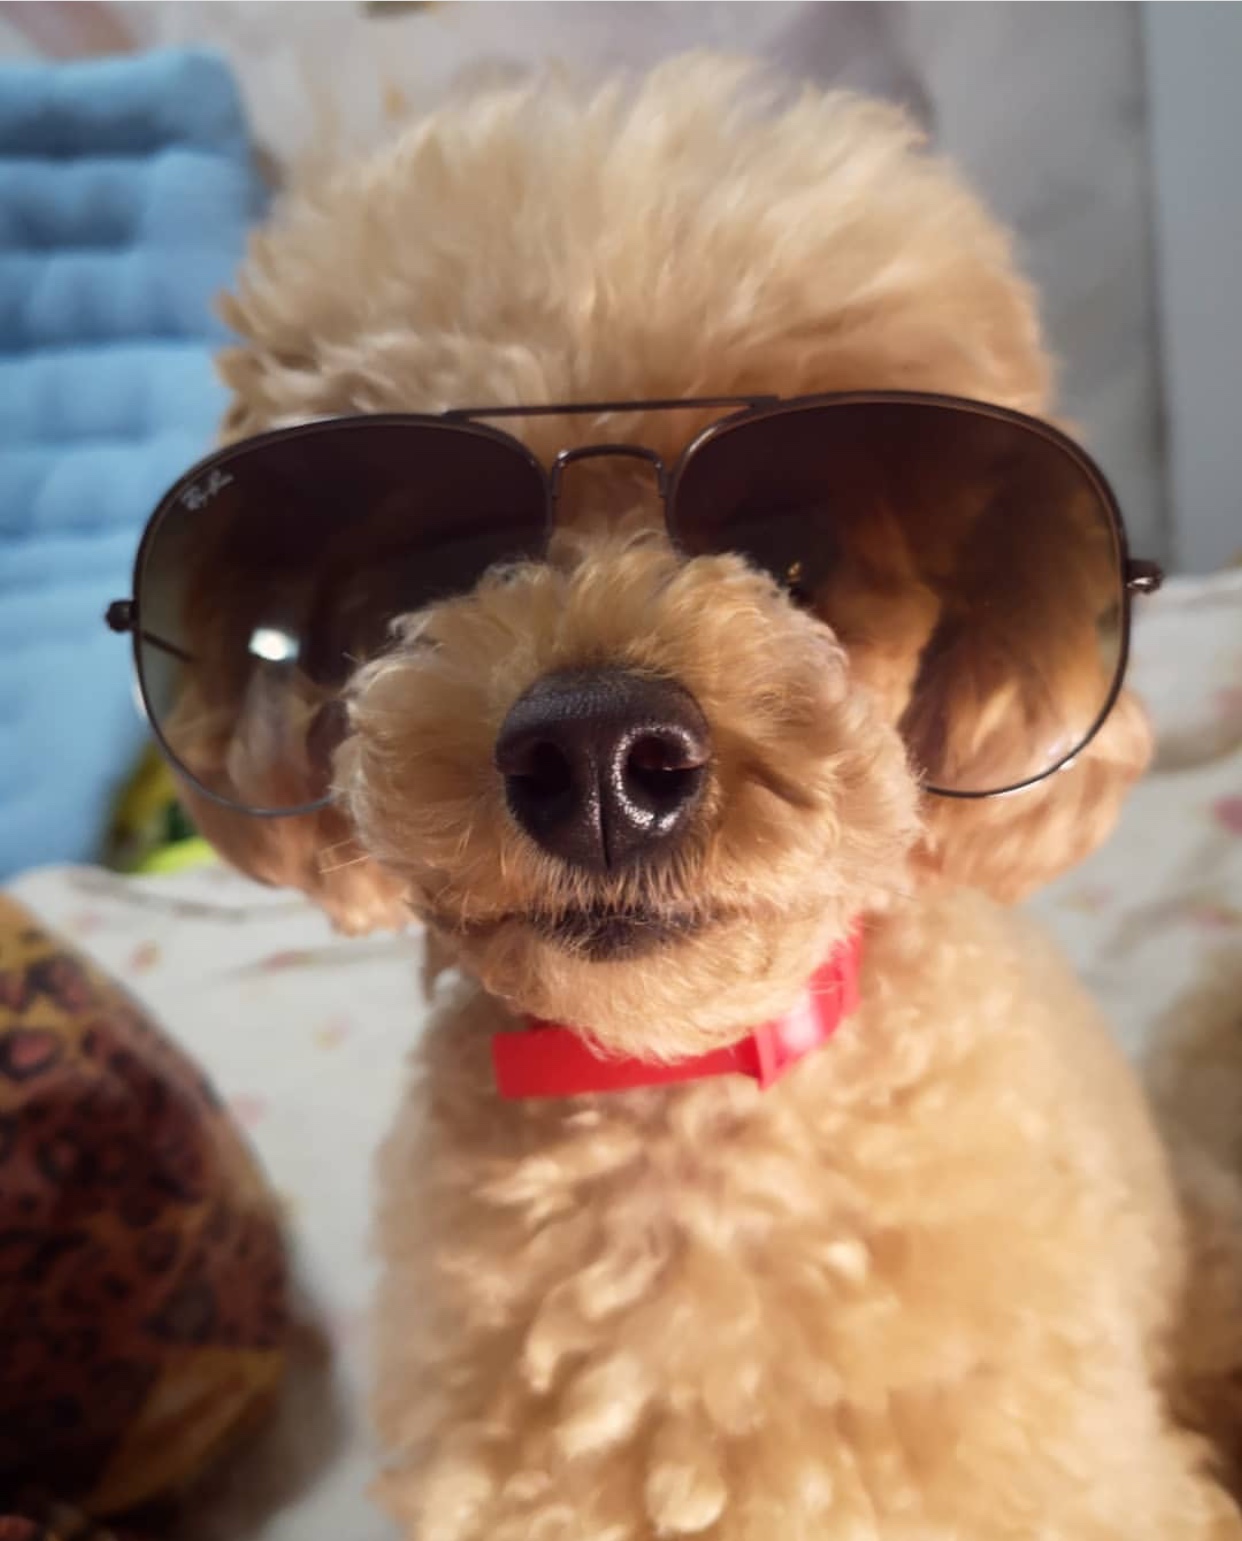 A Poodle puppy wearing sunglasses while sitting on the bed